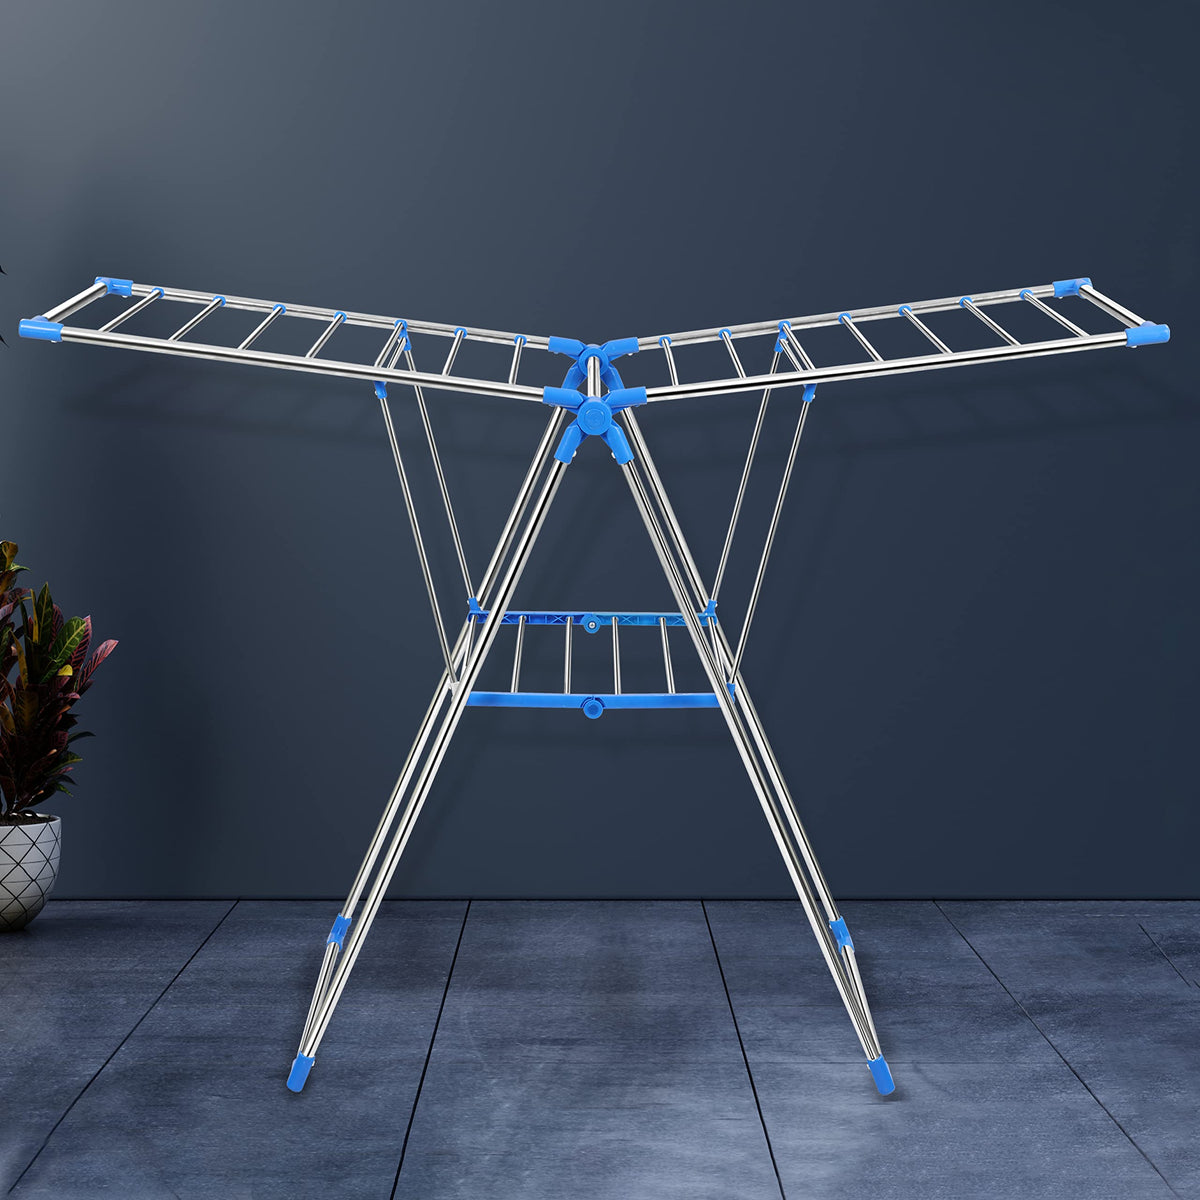 Plantex Stainless Steel Foldable Cloth Drying Rack/Cloth Hanger Stand for Home/Movable Cloth Rack - (Silver & Blue)